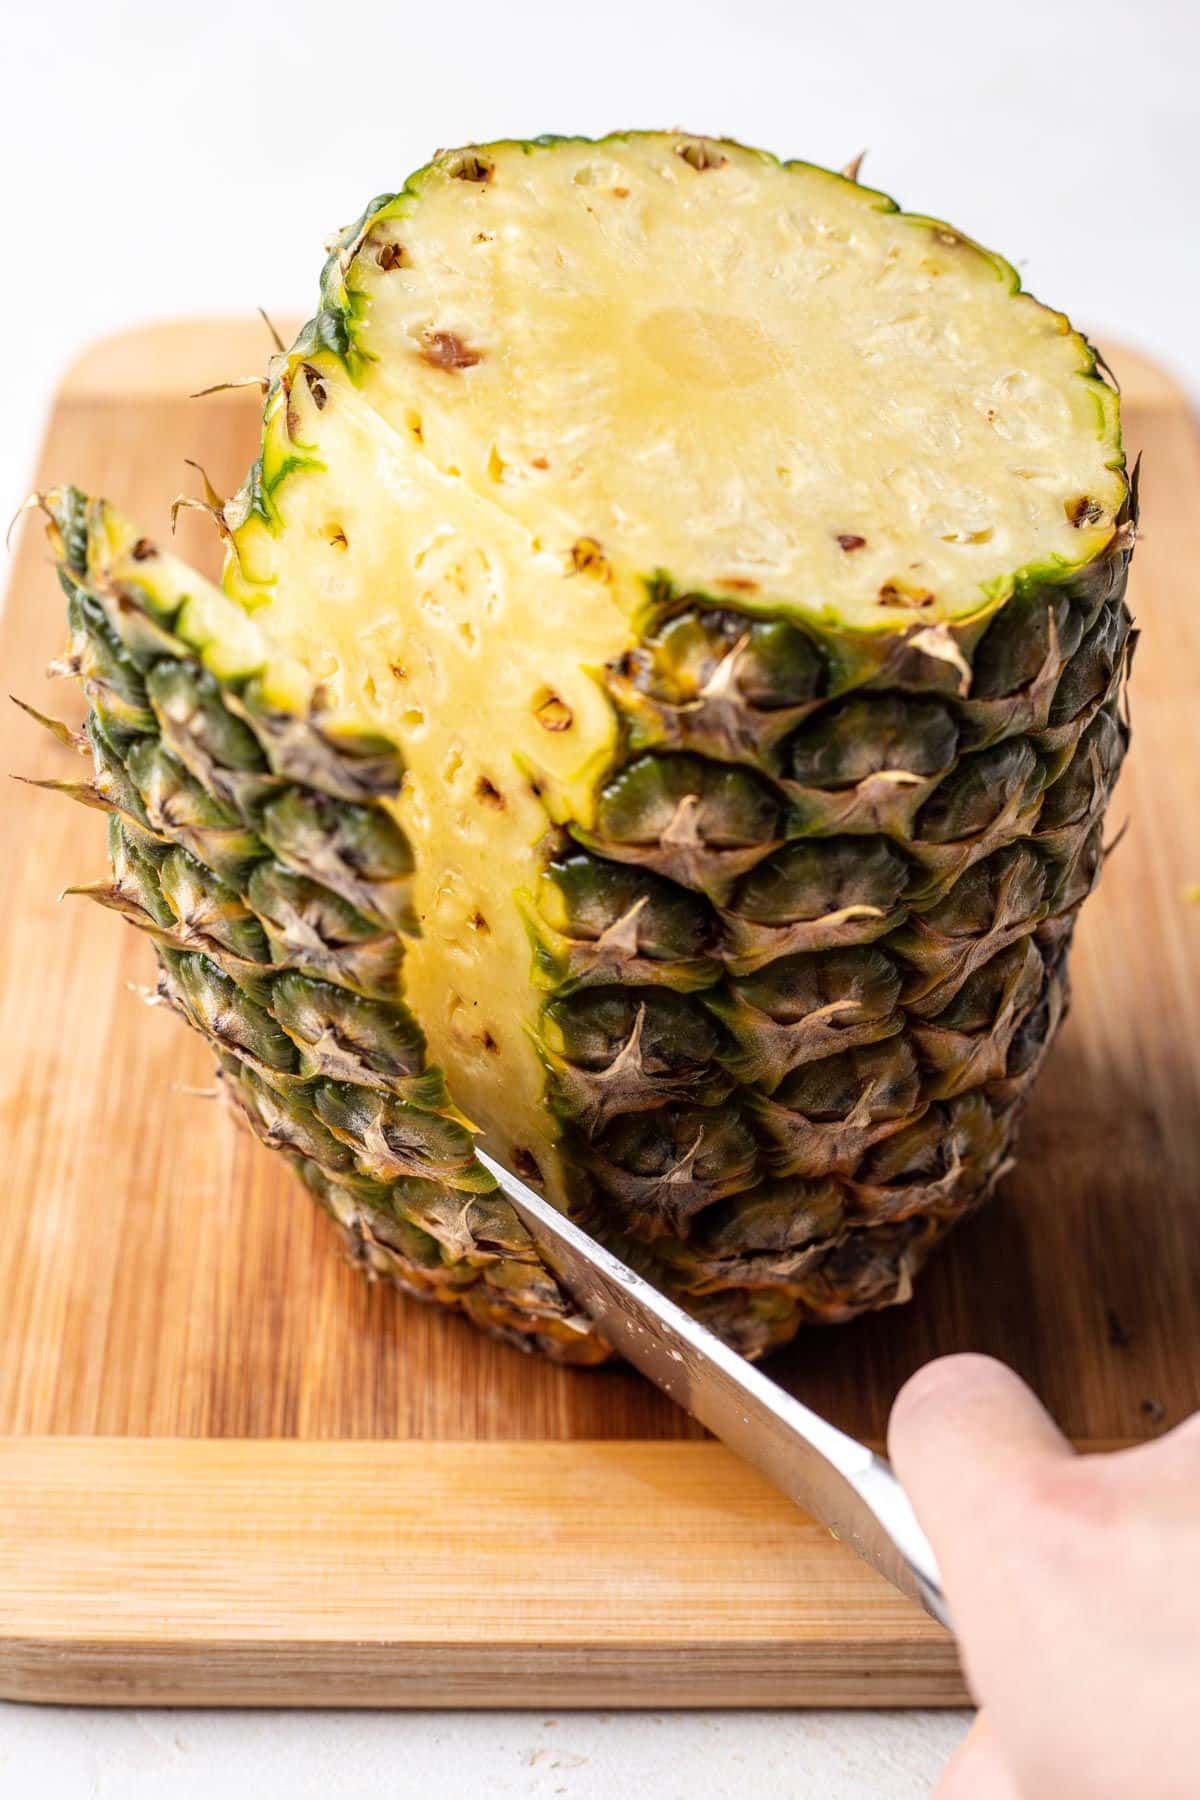 A knife cutting the skin off of a pineapple.